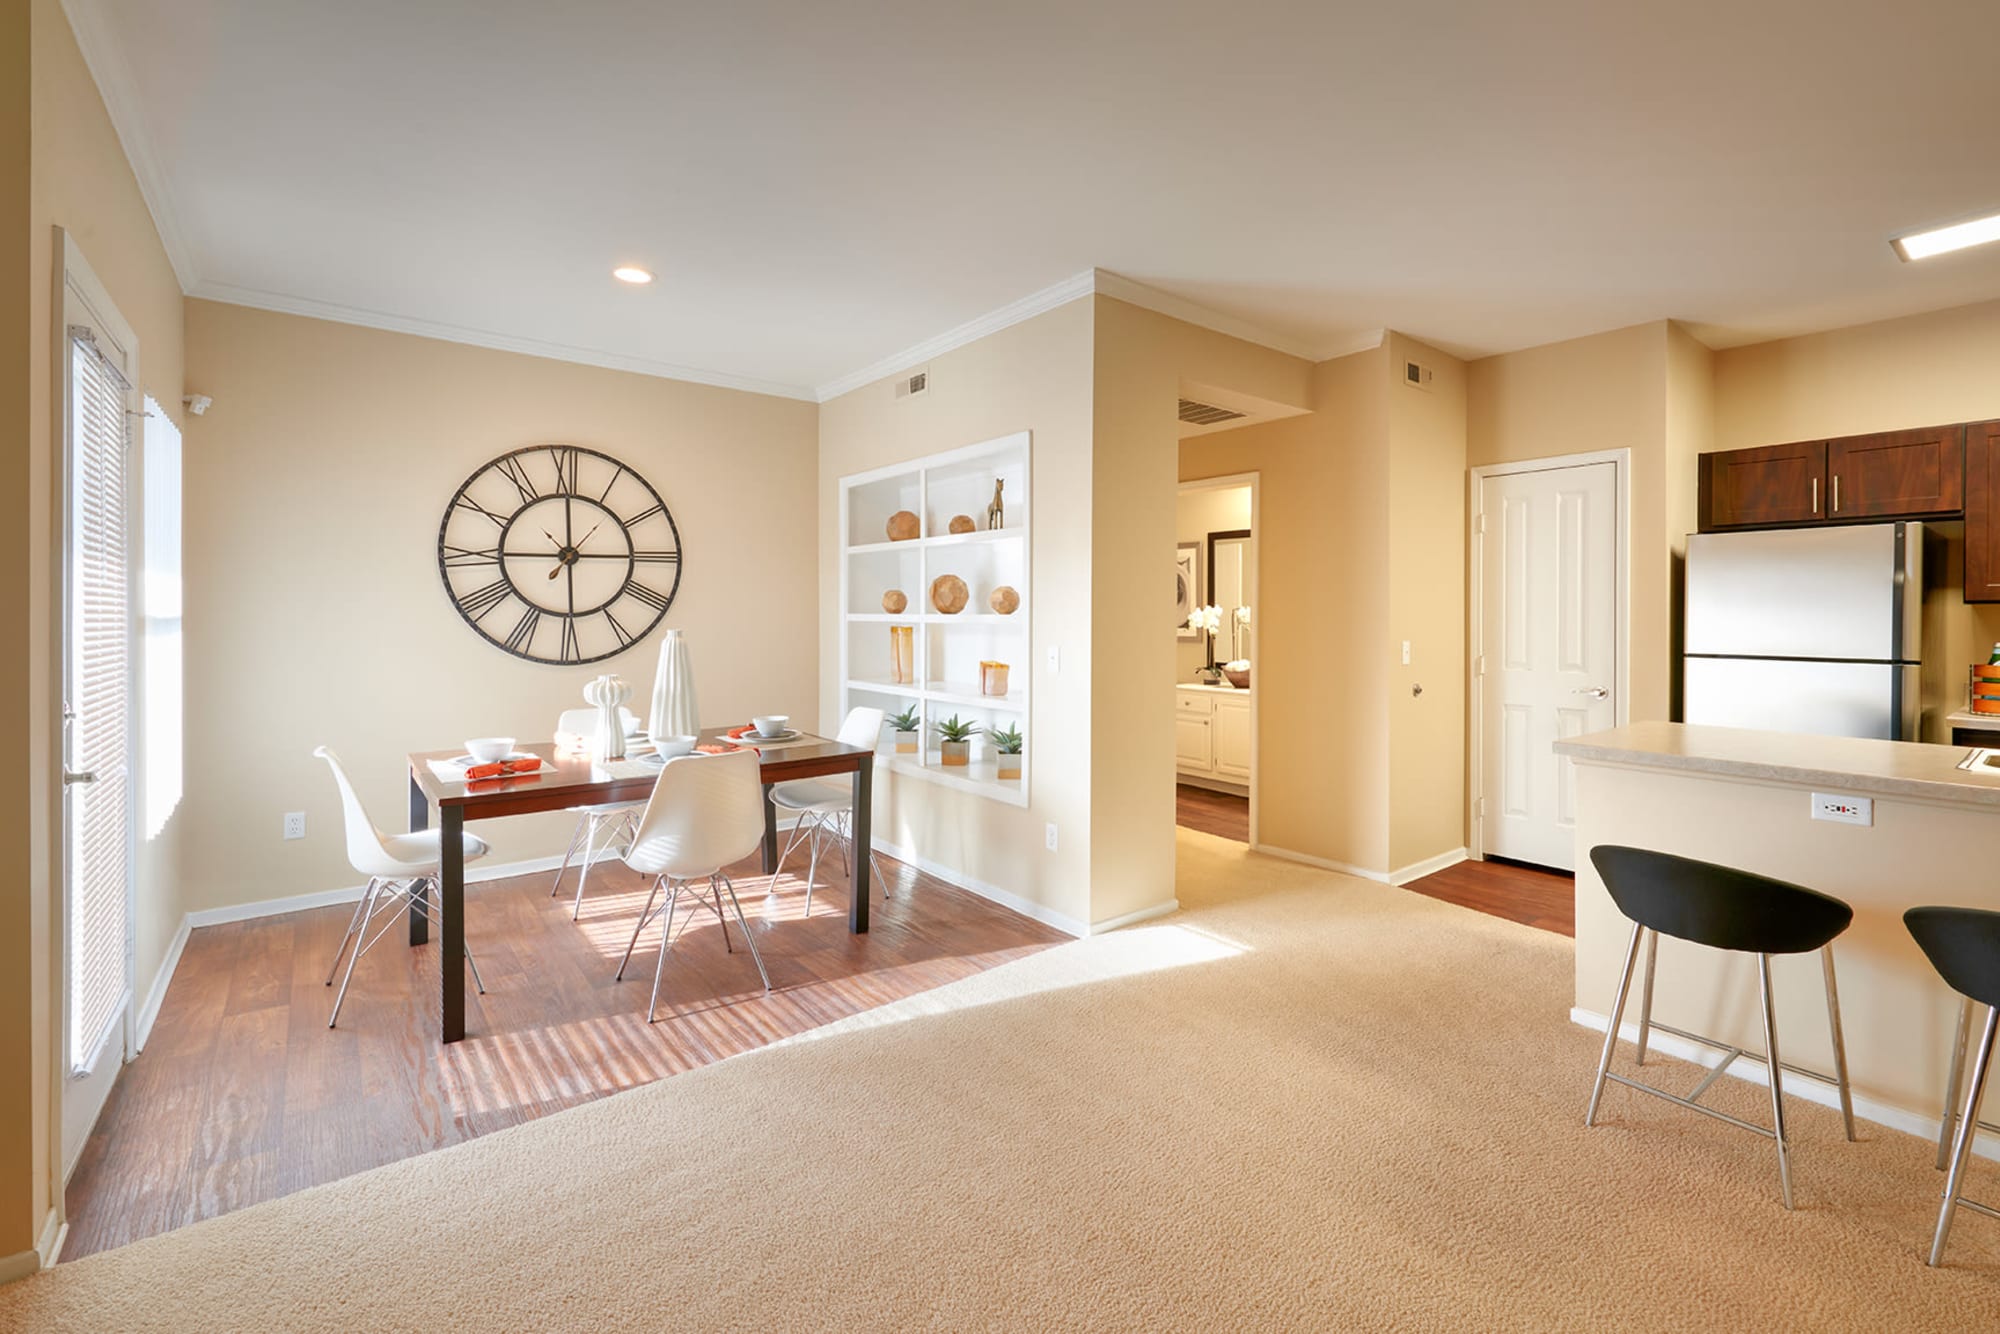 Dining Room and Kitchen at Legend Oaks Apartments in Aurora, Colorado